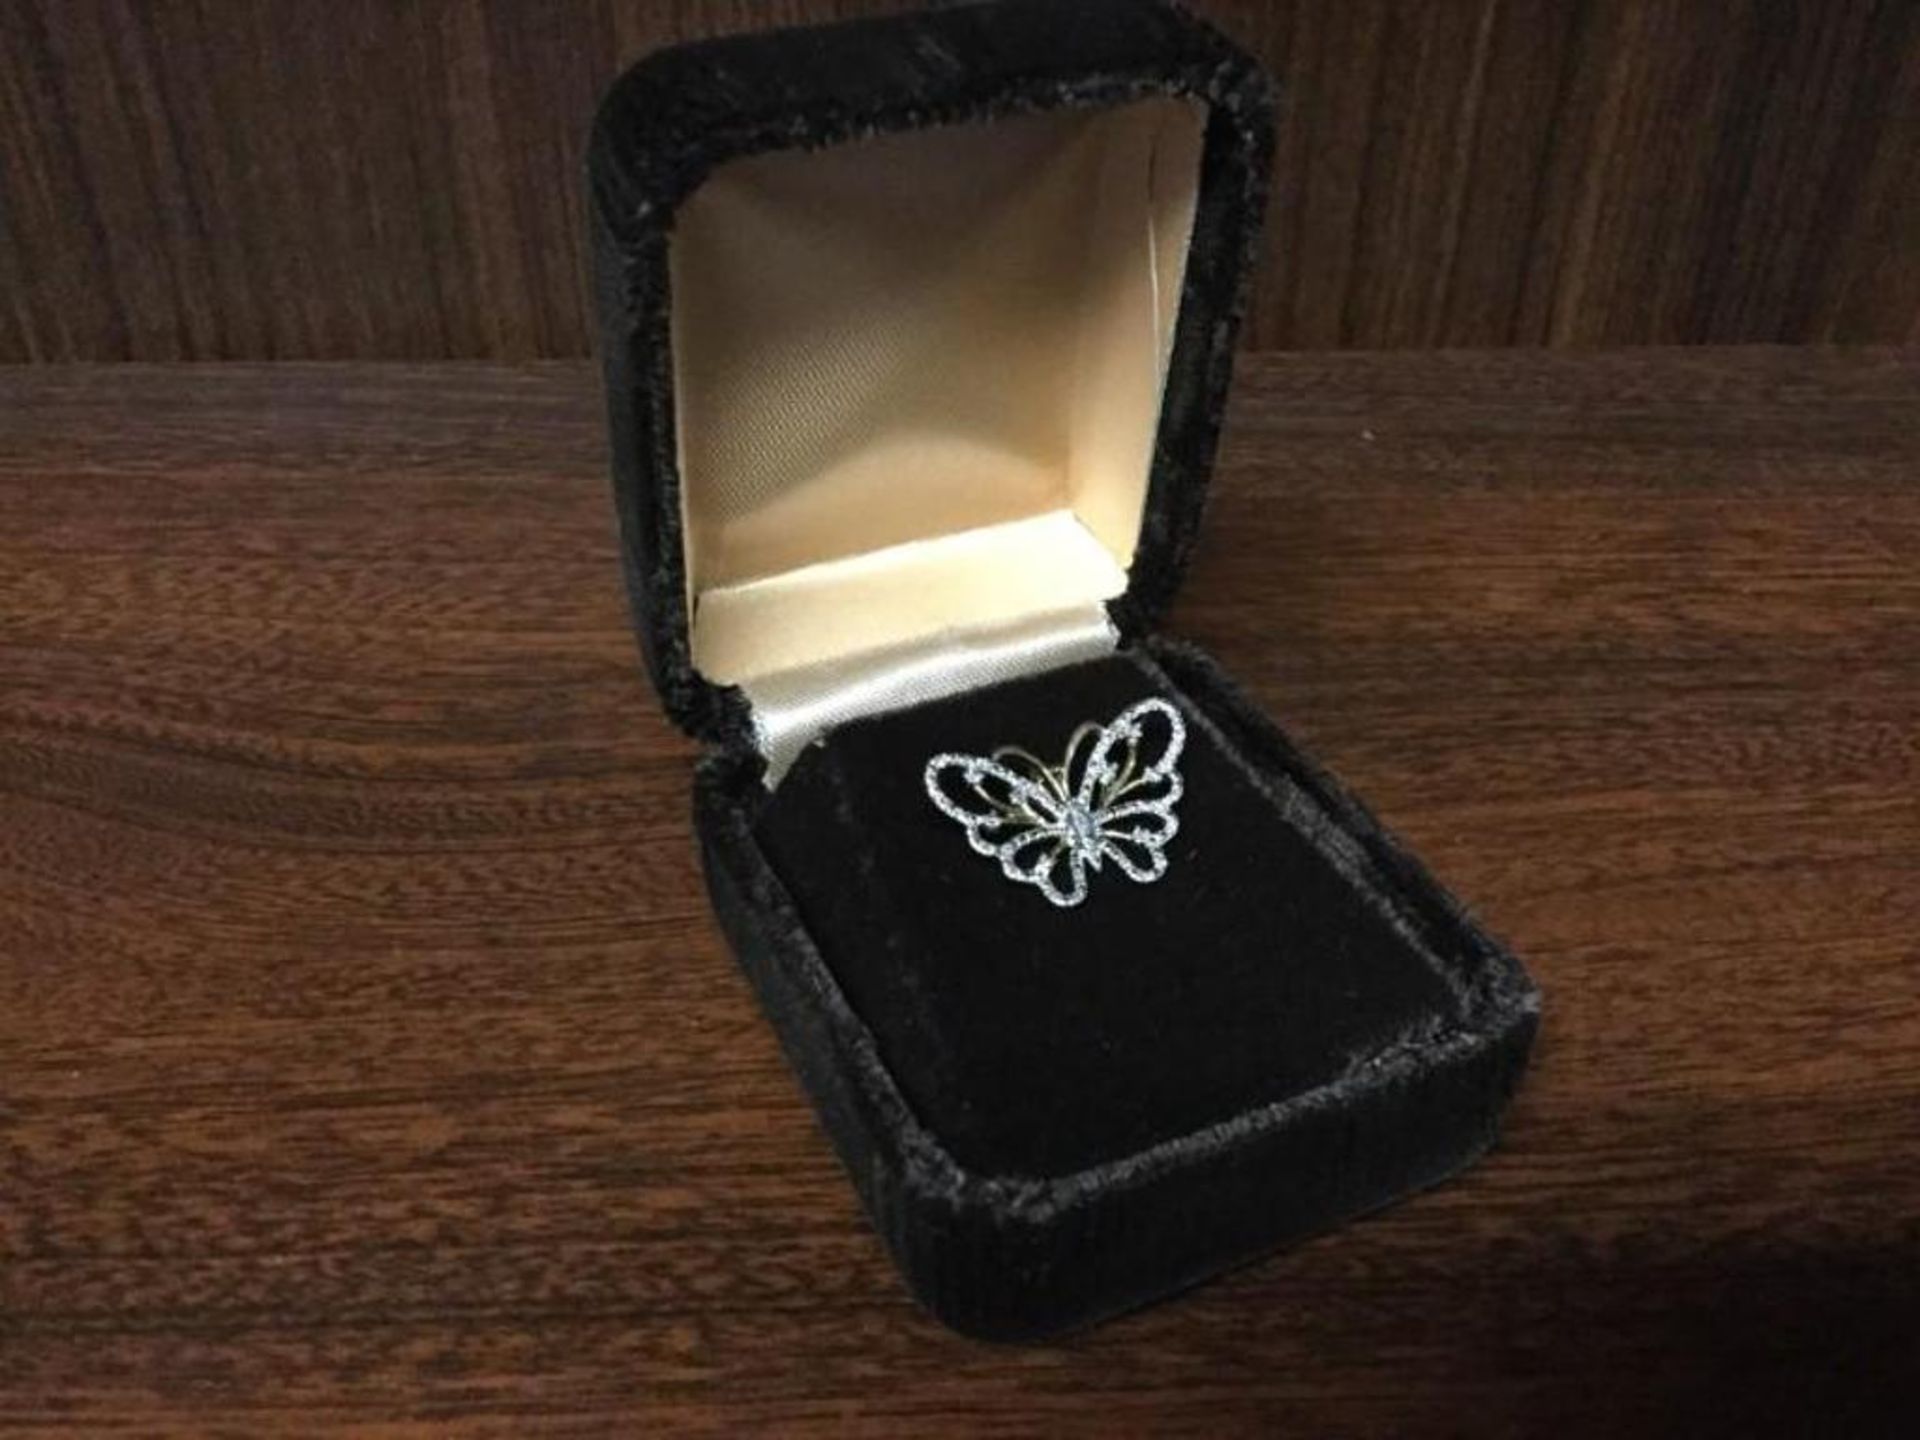 Butterfly diamond and 10 kt gold Pendant - 17-ED 6733 - value1260 - Image 2 of 3